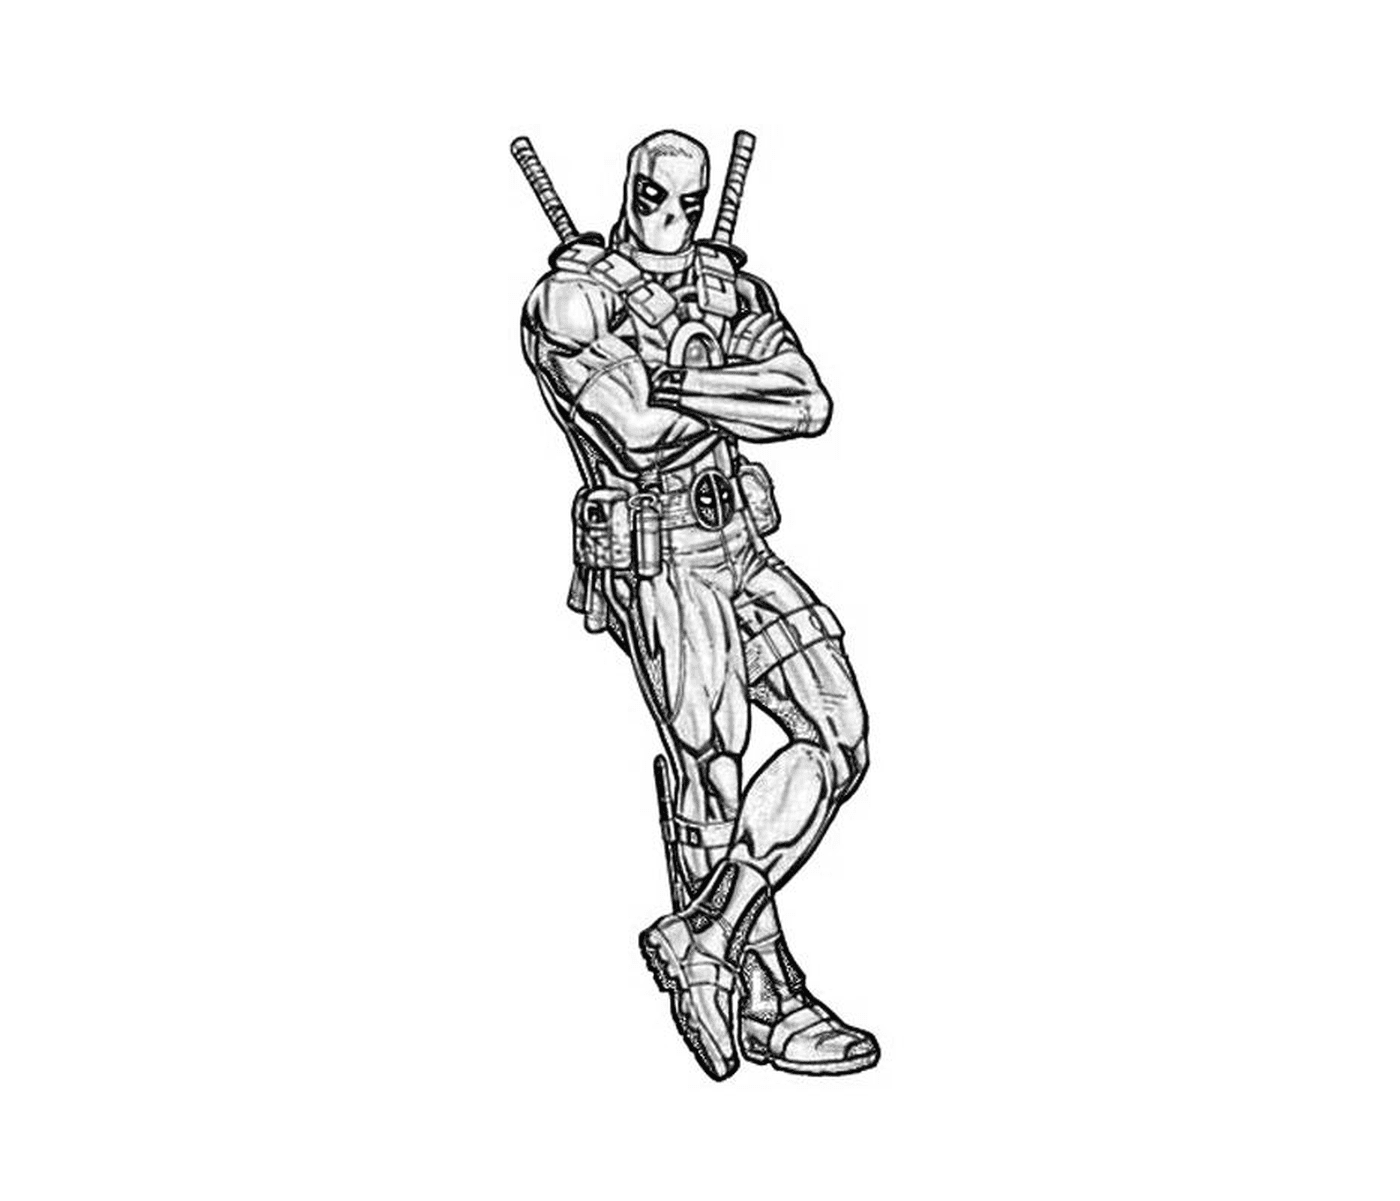  Deadpool for coloring in suit 